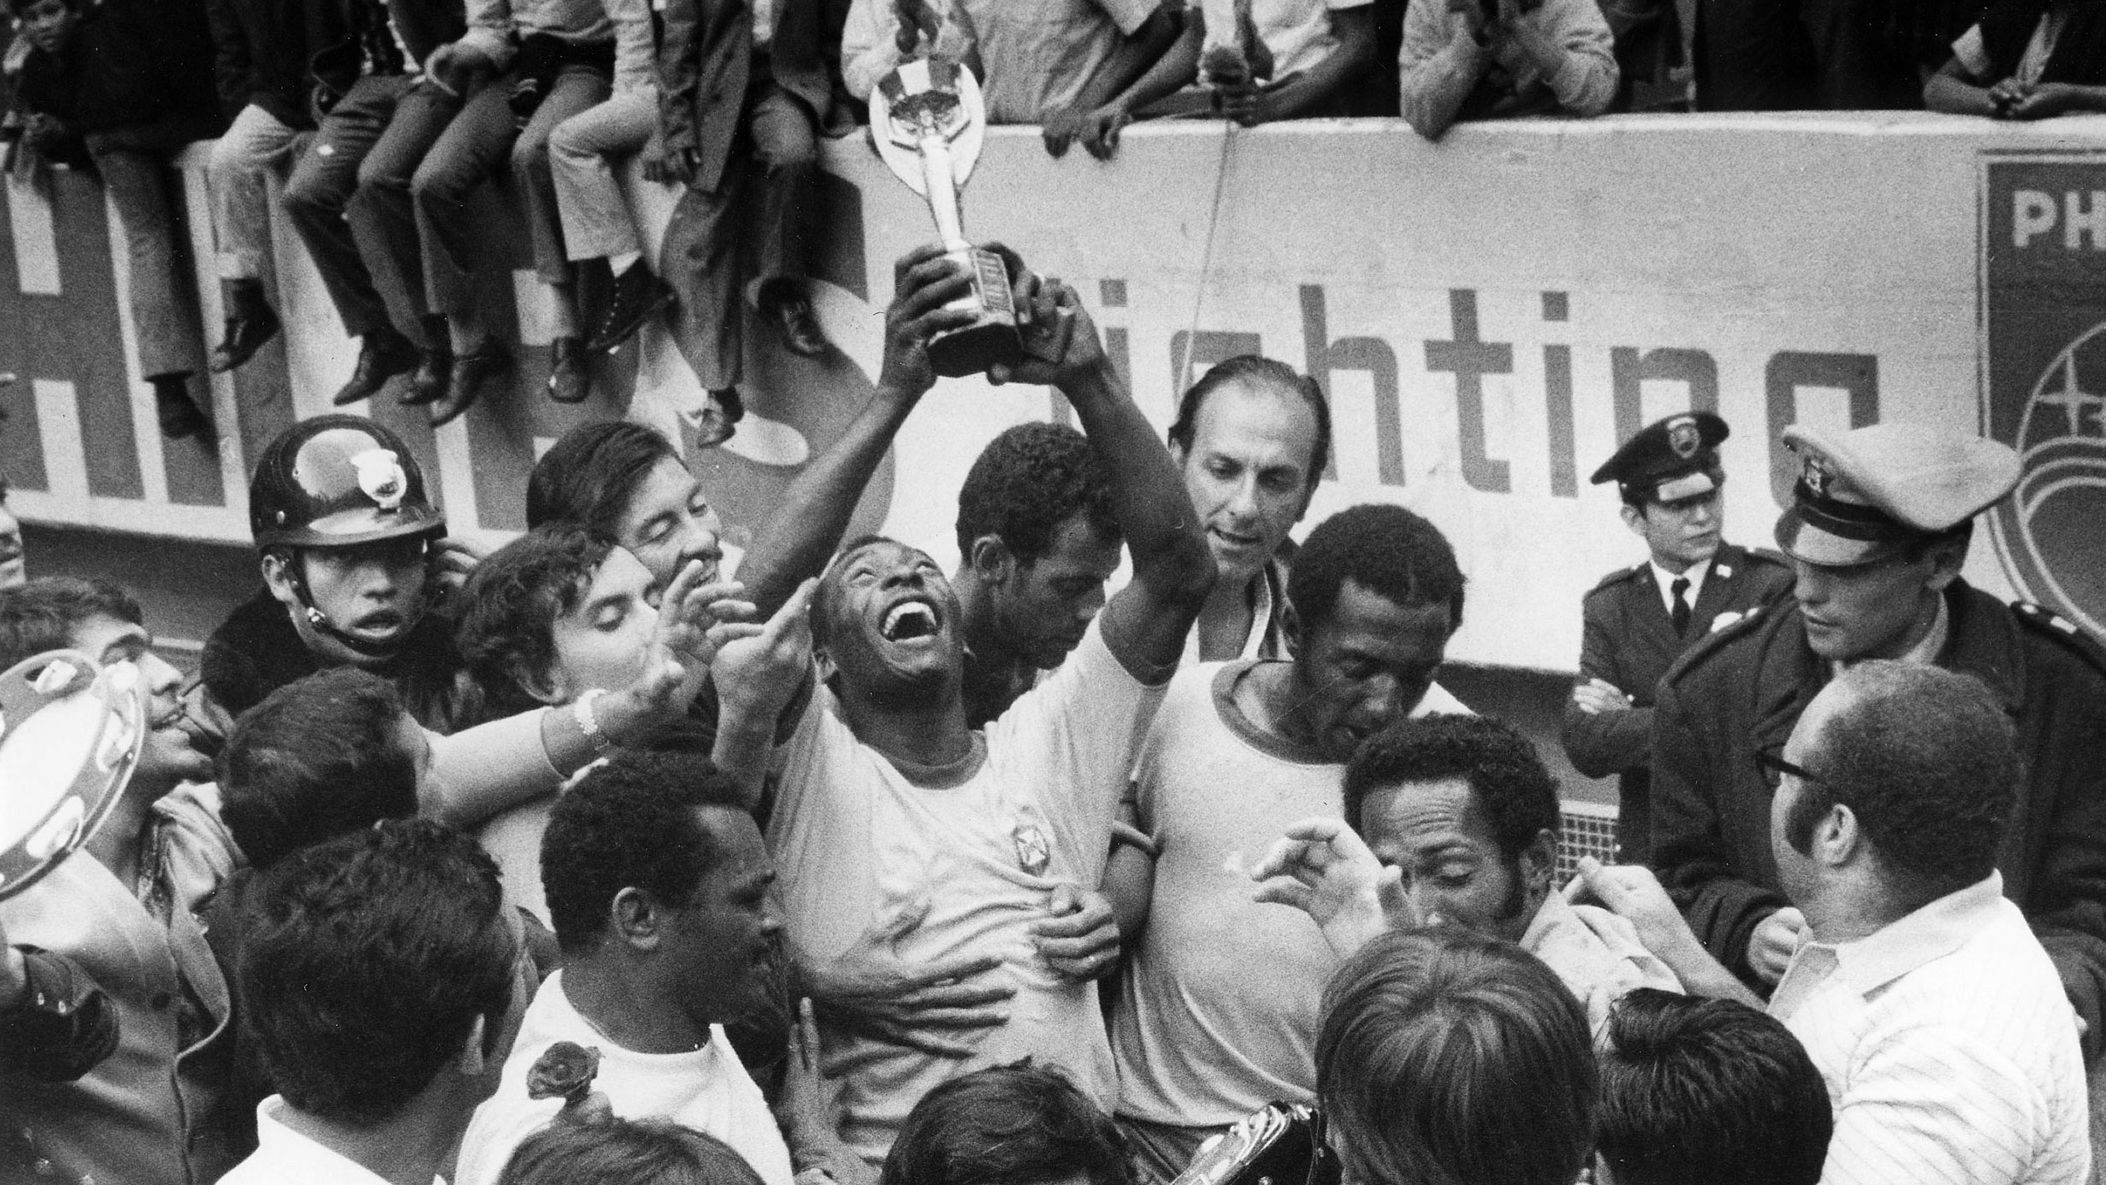 Pelé raises the Jules Rimet Trophy after winning the 1970 World Cup. Brazil was able to permanently keep that trophy for winning its third title, and a new World Cup trophy was introduced in 1974.